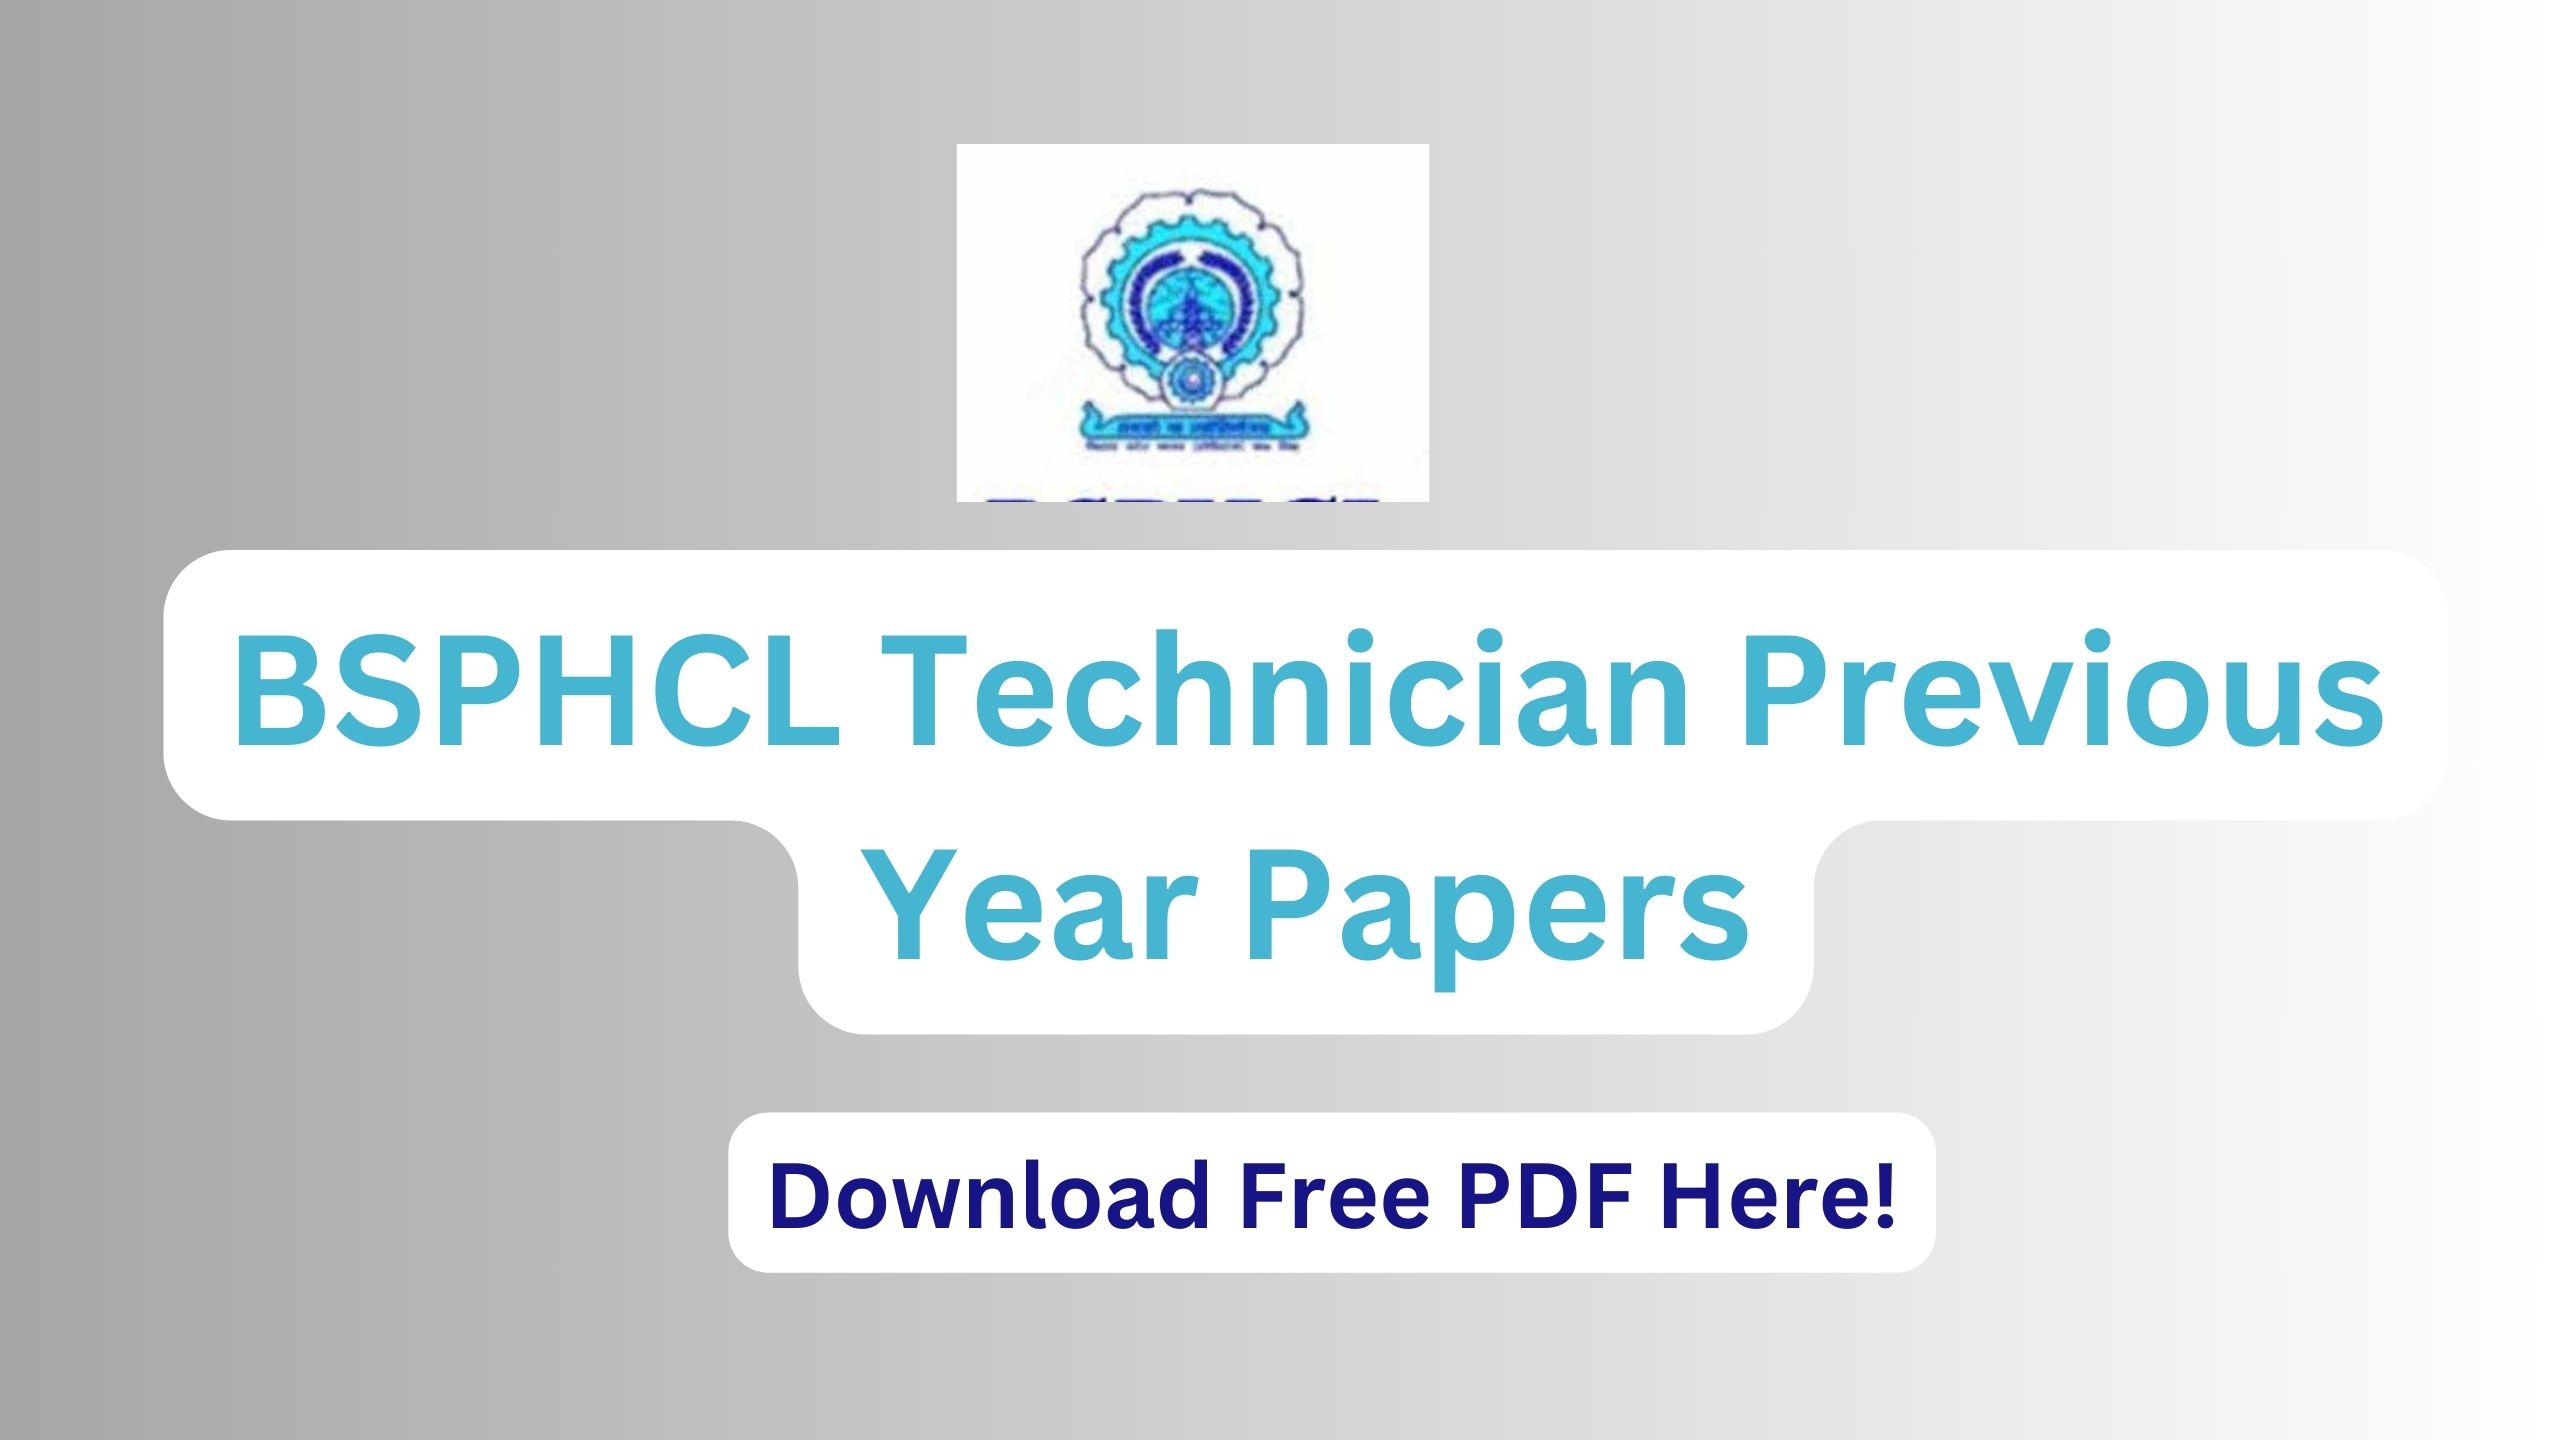 BSPHCL Technician Previous Year Papers